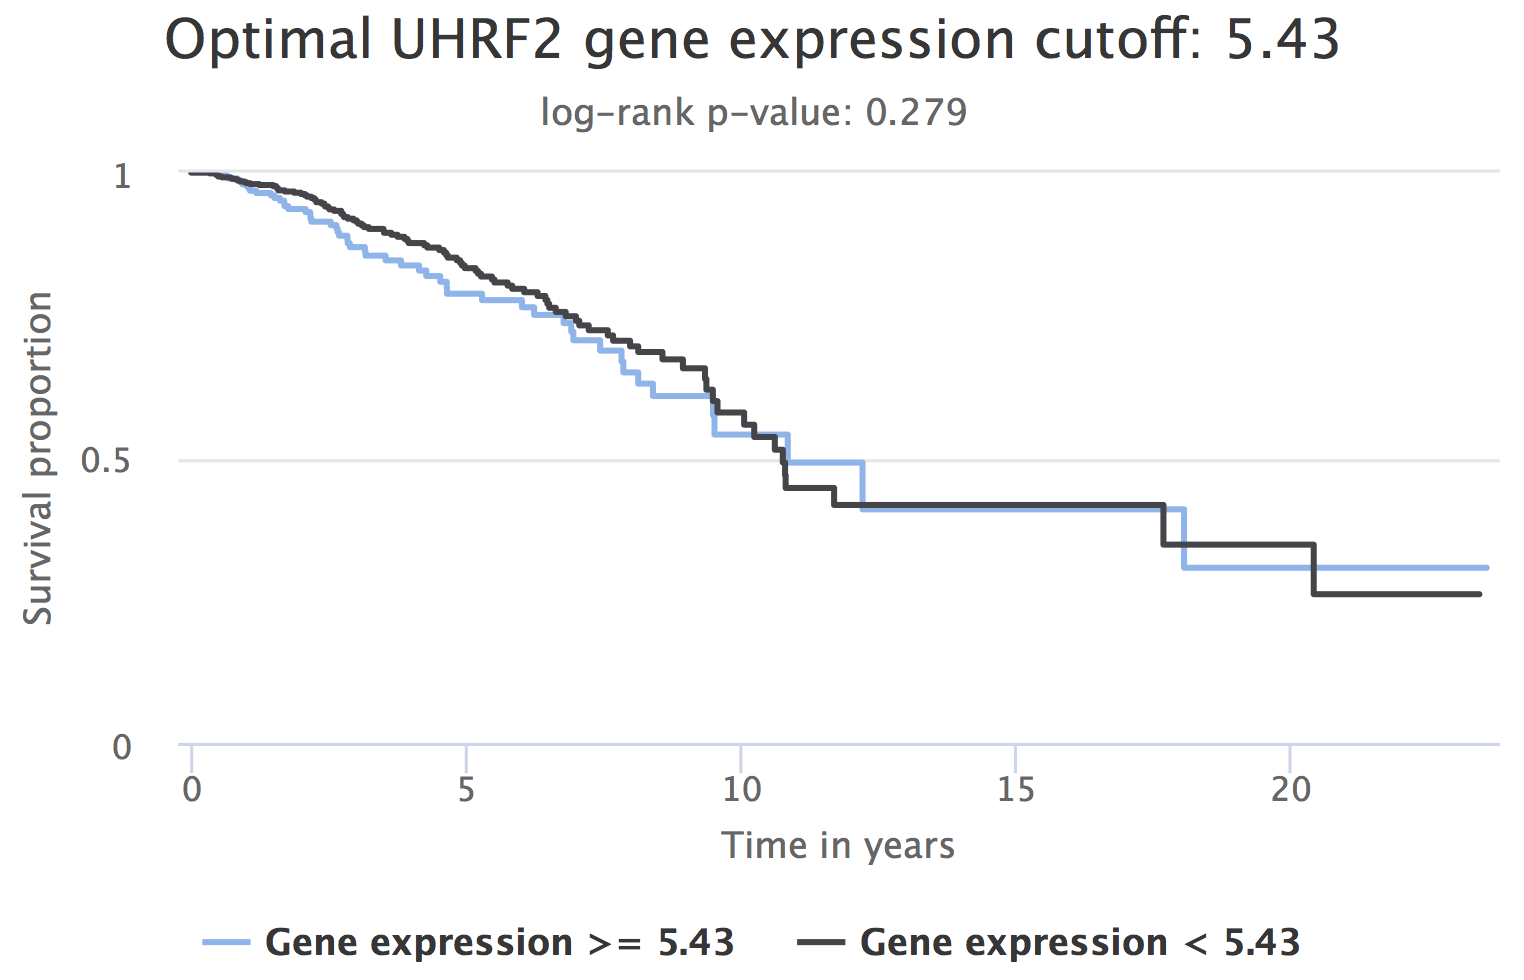 Prognostic value of *UHRF2* expression (patients separated by the optimal gene expression cutoff of 5.43).